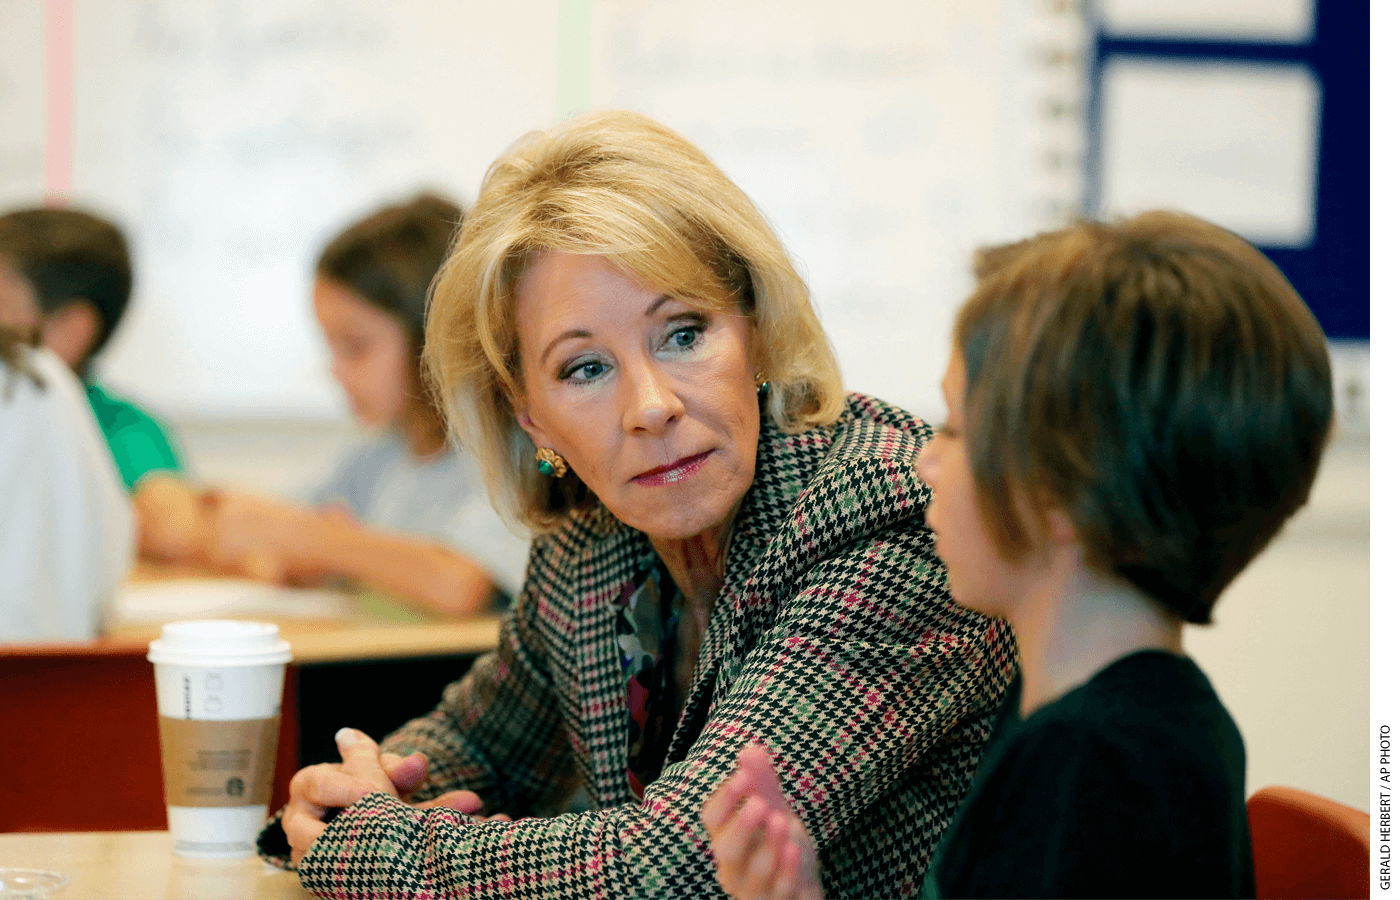 Education Secretary Betsy DeVos visits a classroom at the Edward Hynes Charter School in New Orleans, Friday, Oct. 5, 2018.